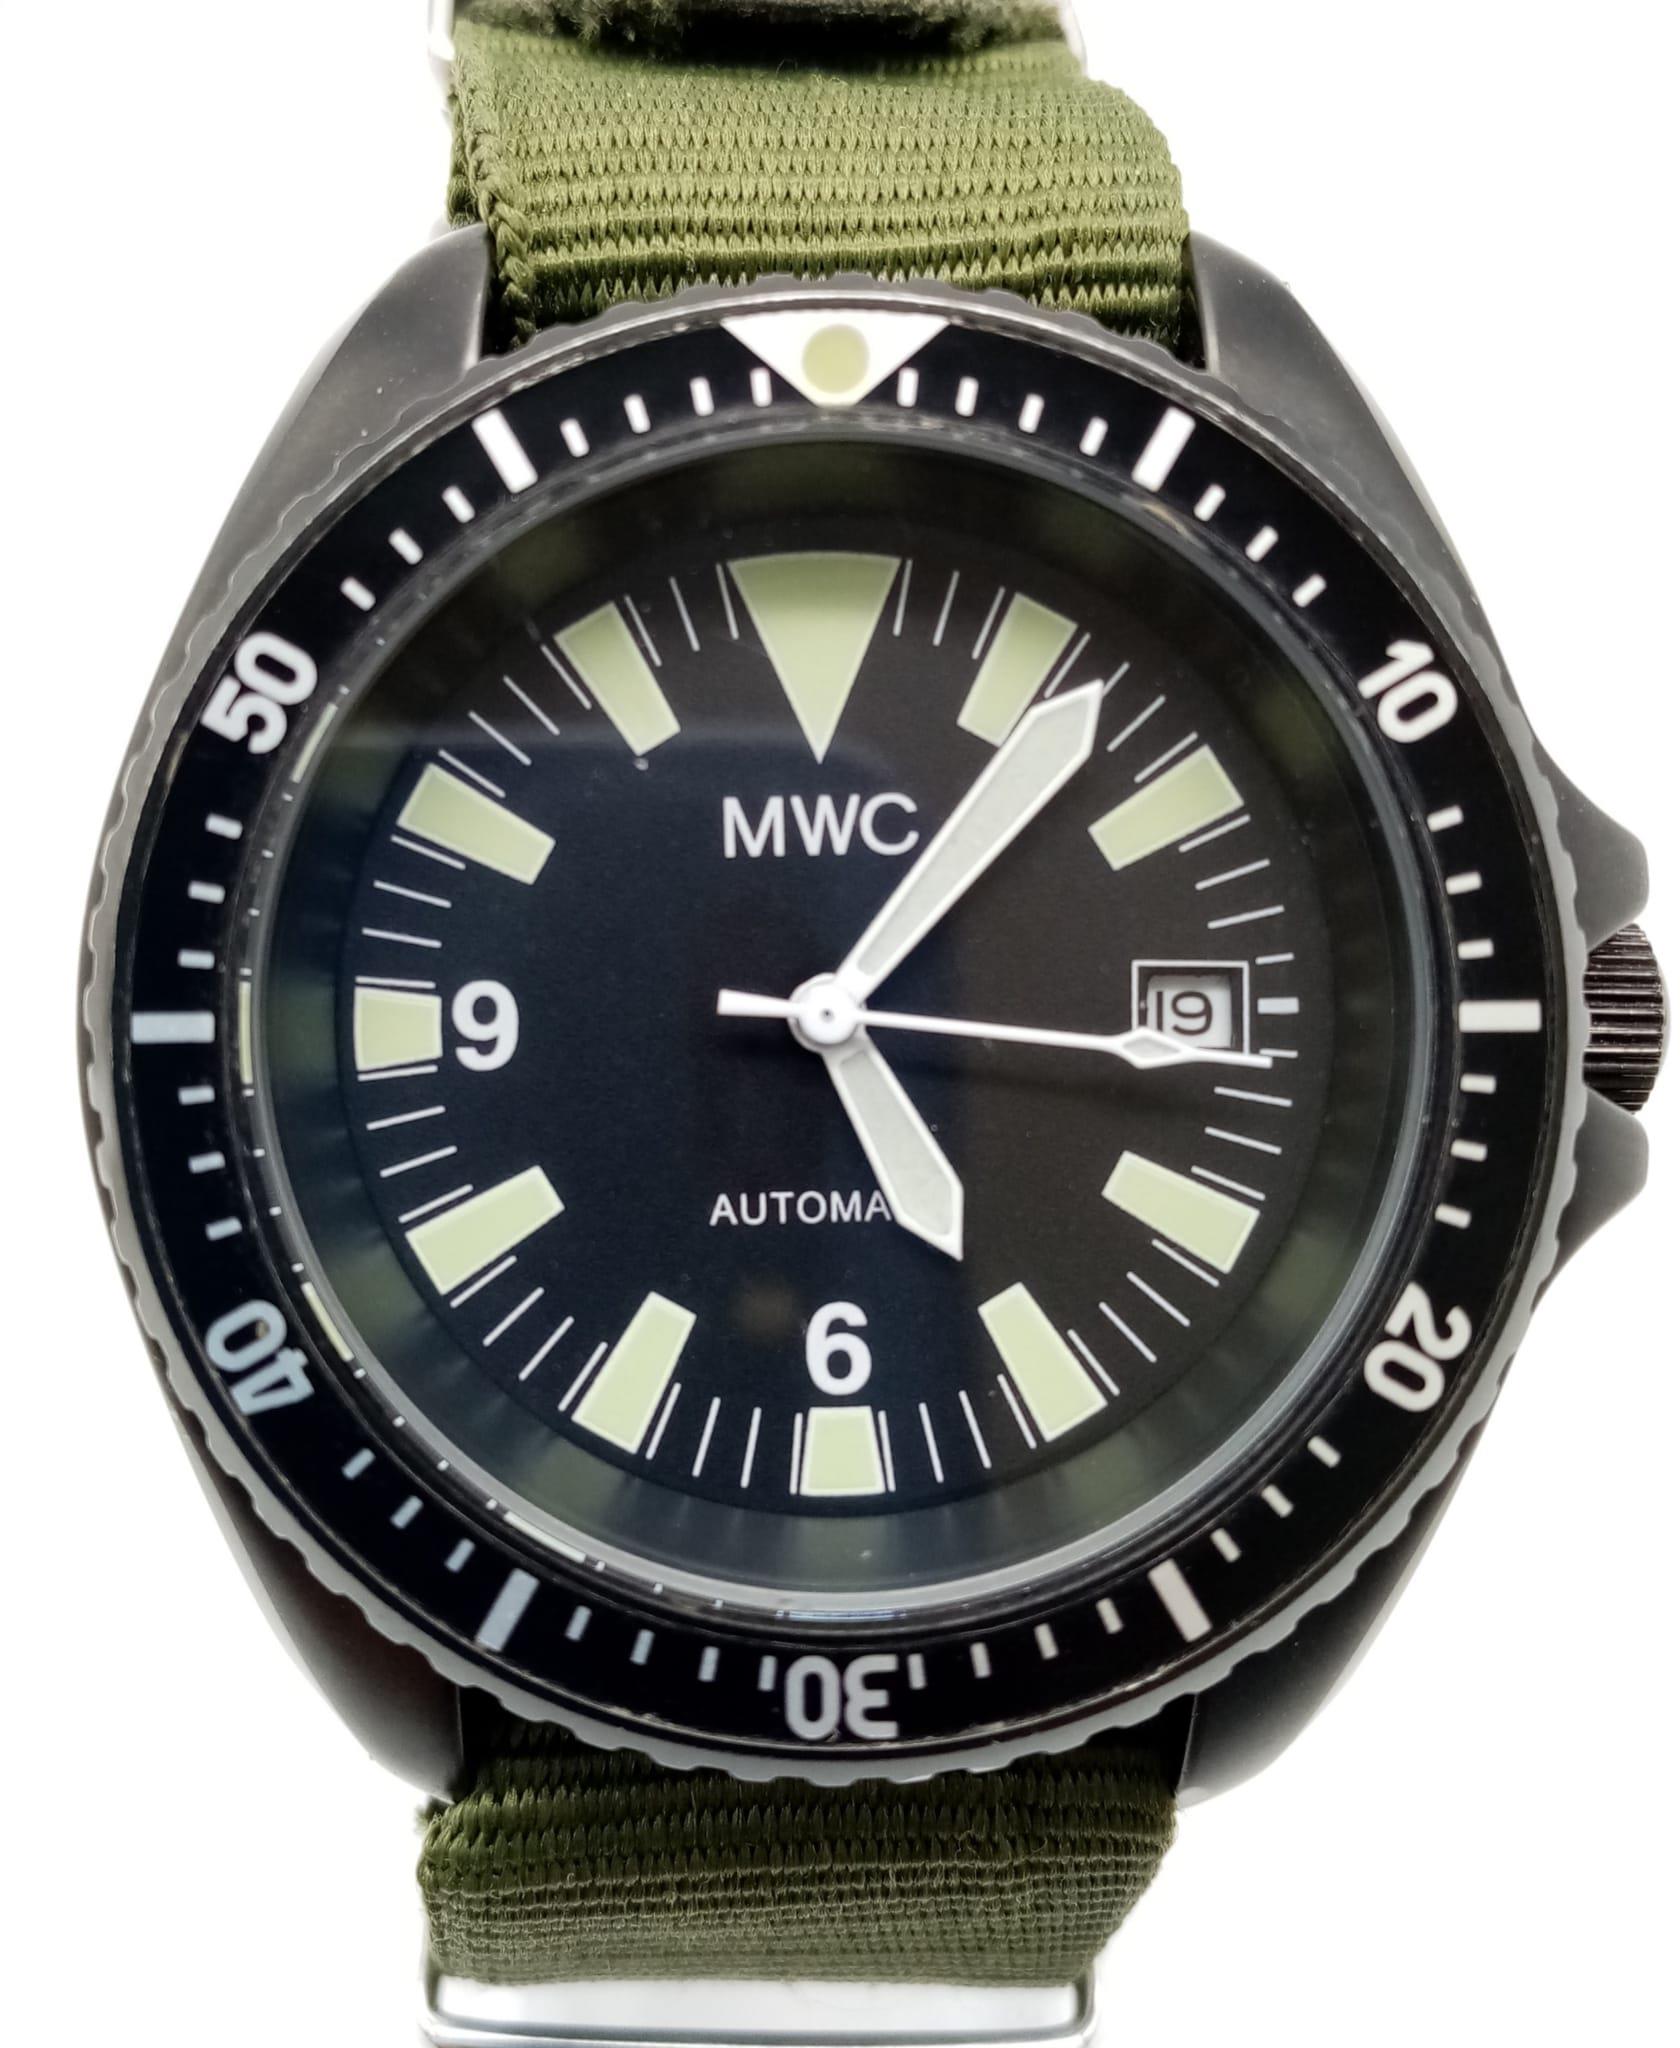 An Excellent Condition, Men’s, Full Military Spec, MWC Automatic Divers Date Watch. Black Hardened